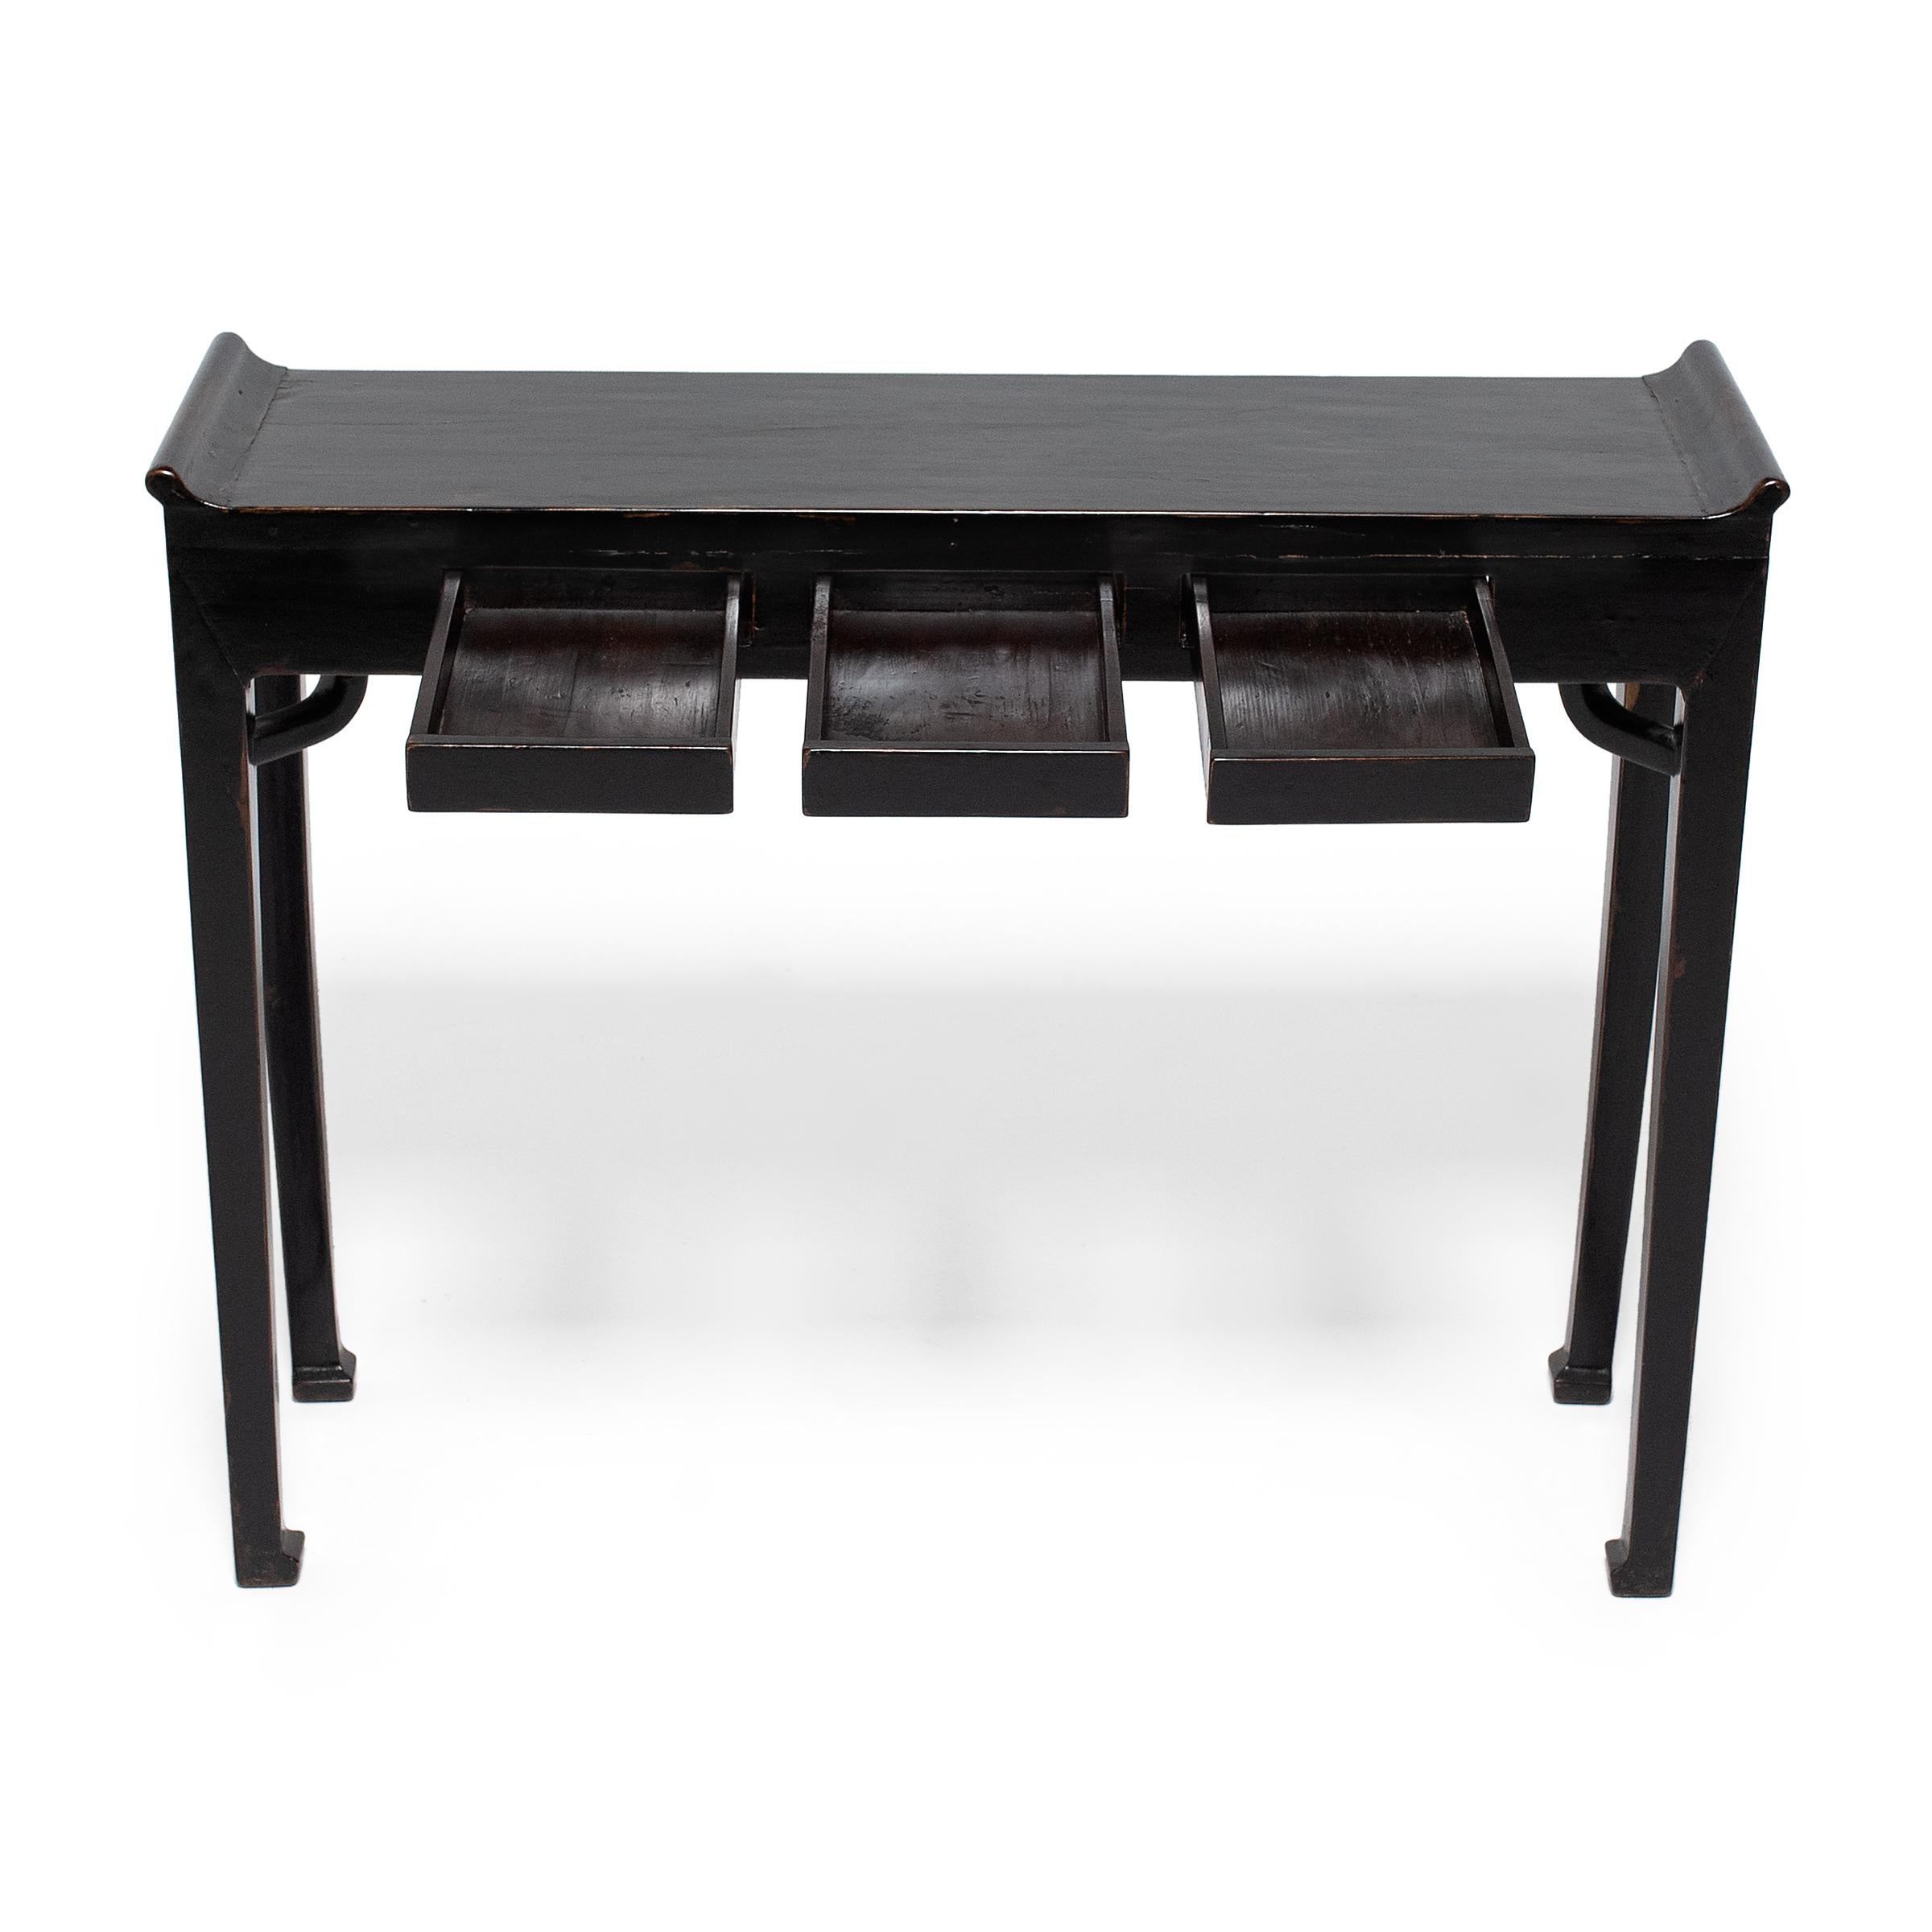 Lacquered Chinese Black Lacquer Altar Table with Hidden Drawers, c. 1900